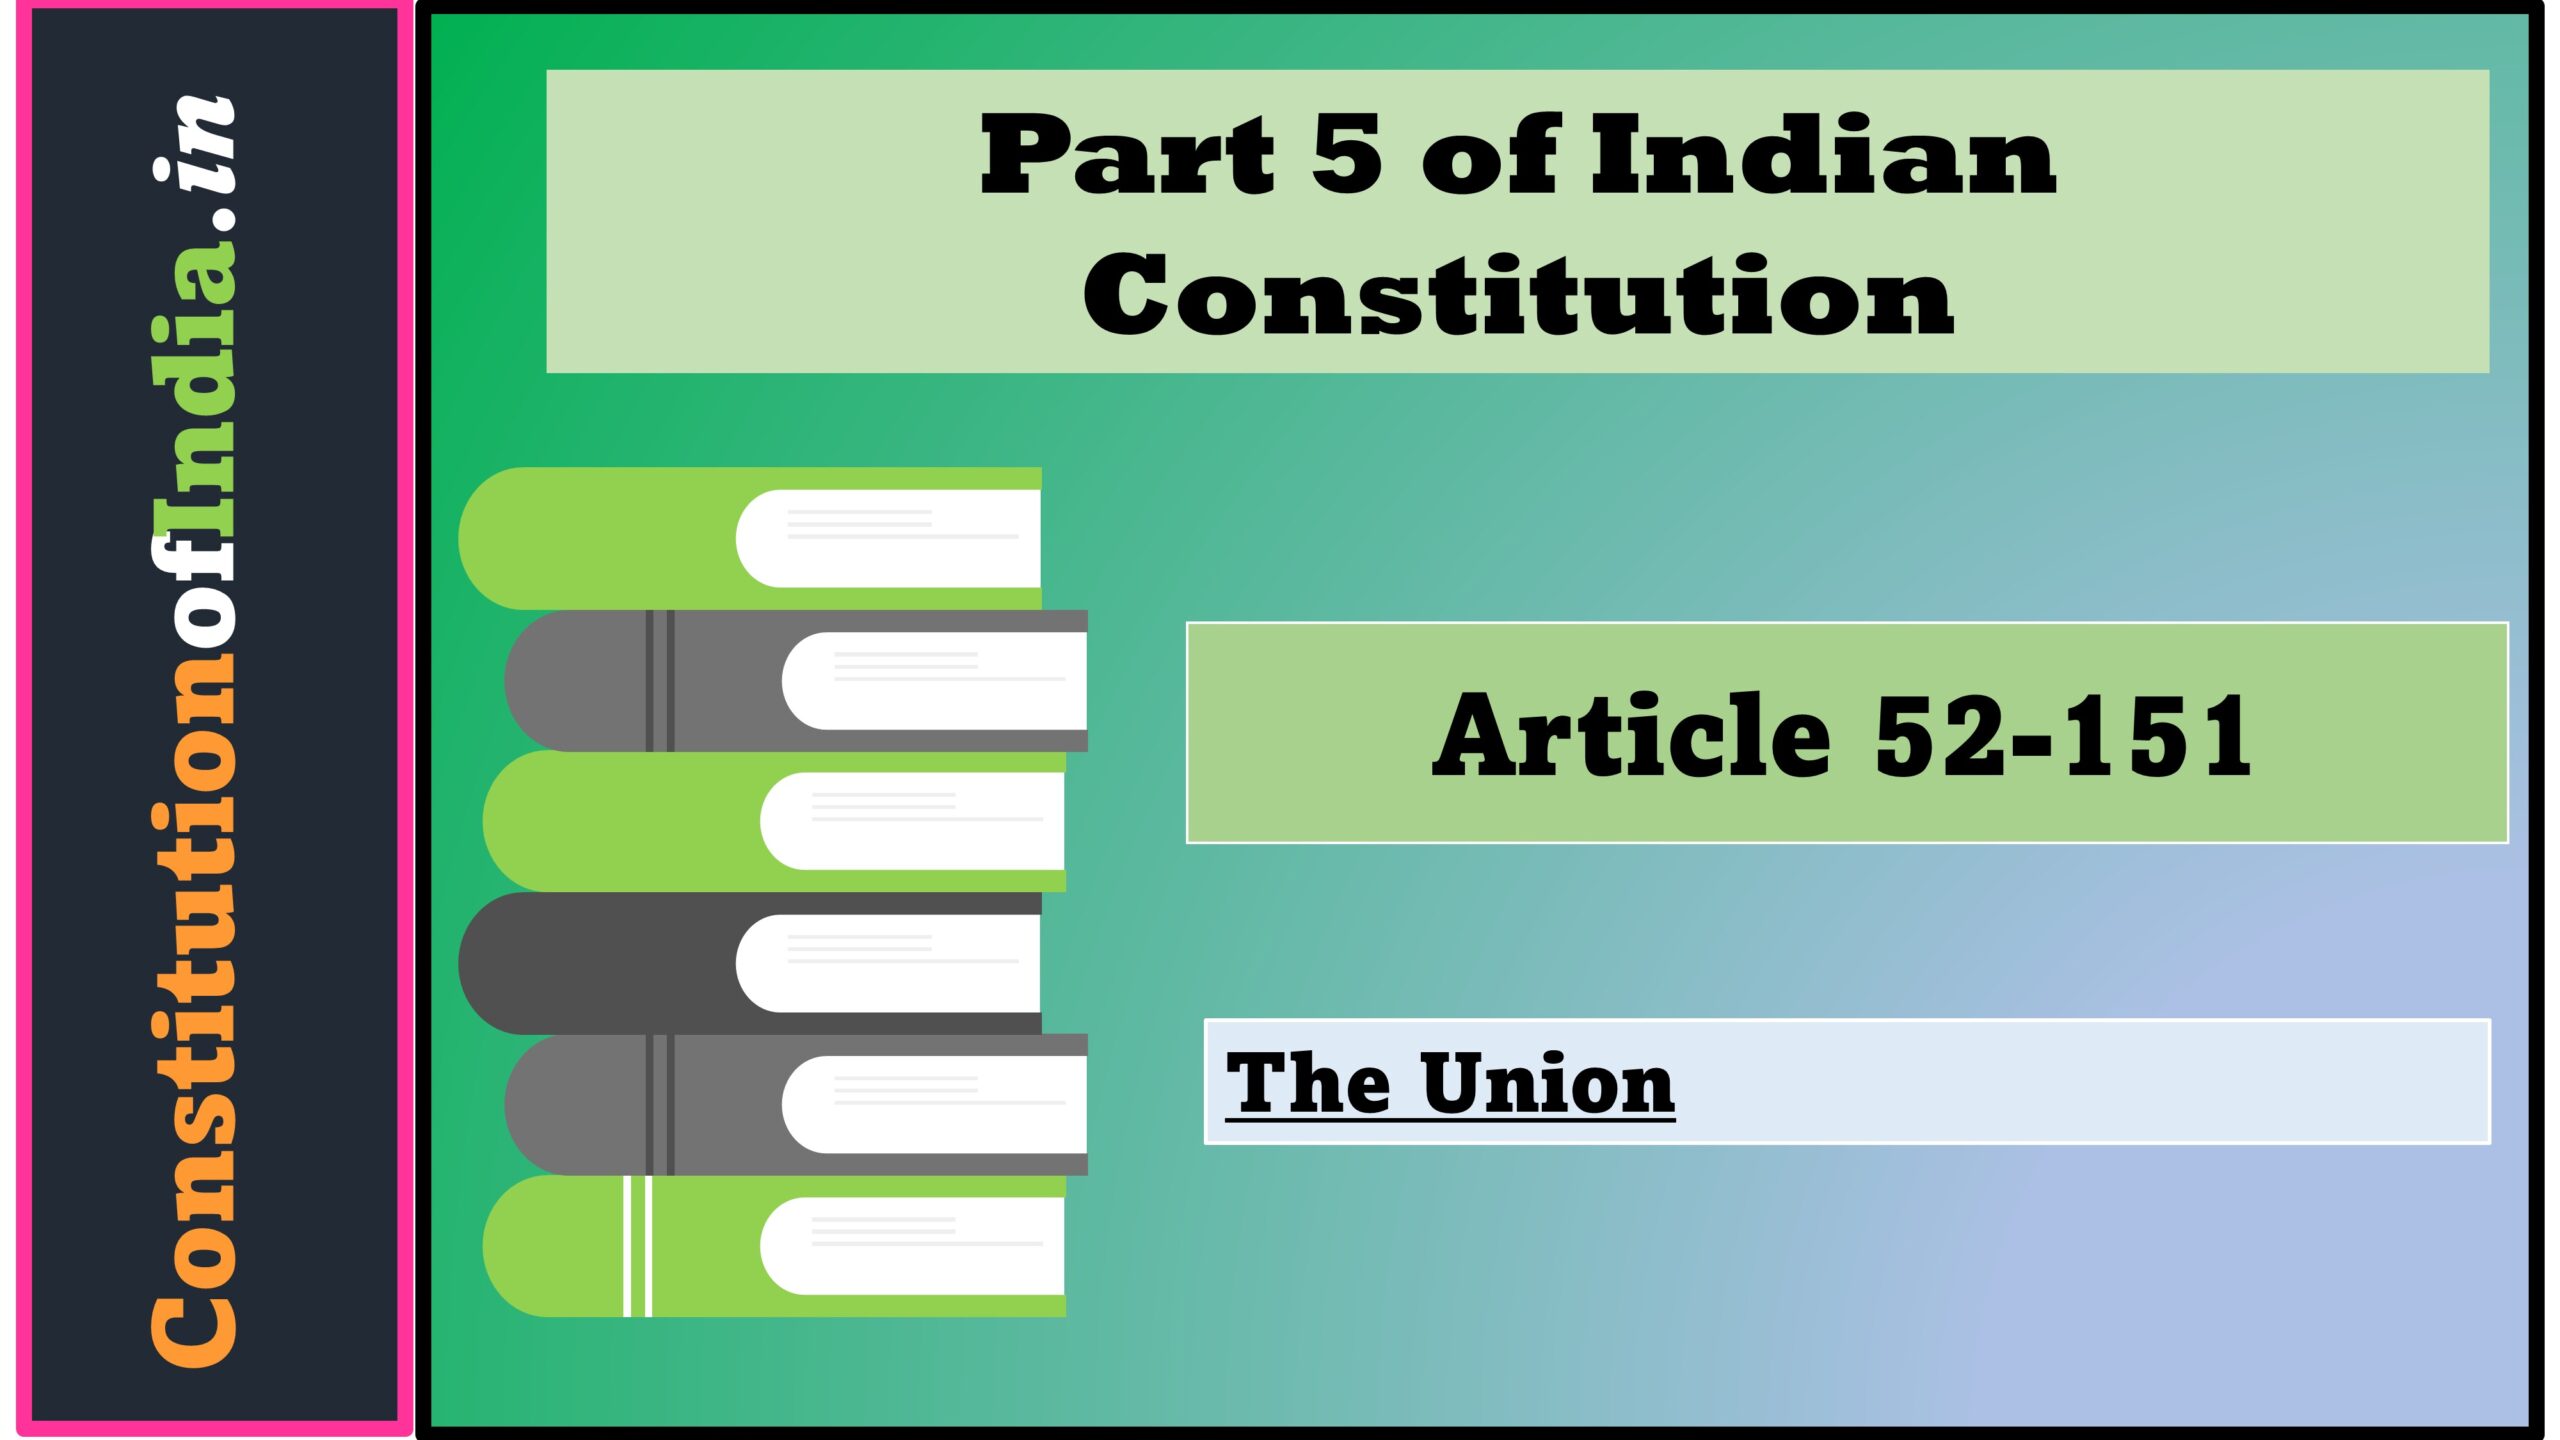 Part 5 of Indian Constitution